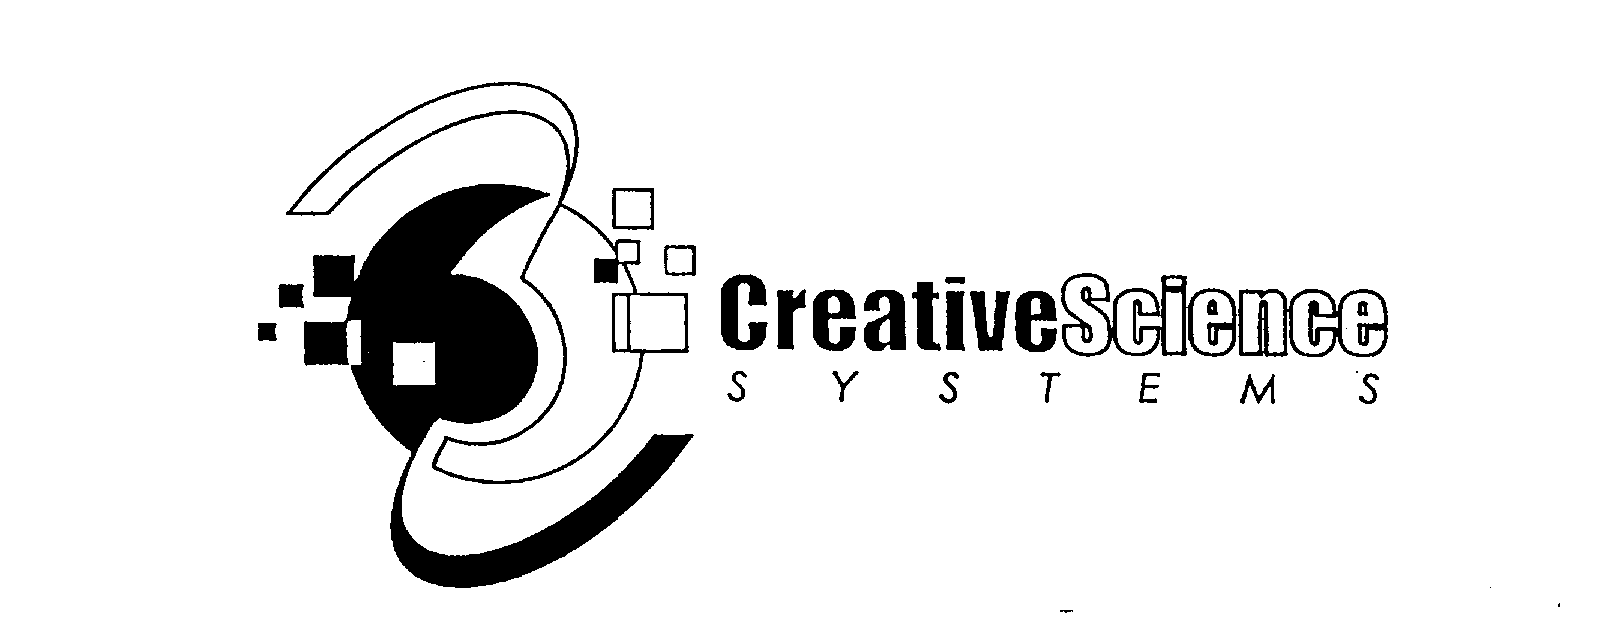  CREATIVE SCIENCE SYSTEMS